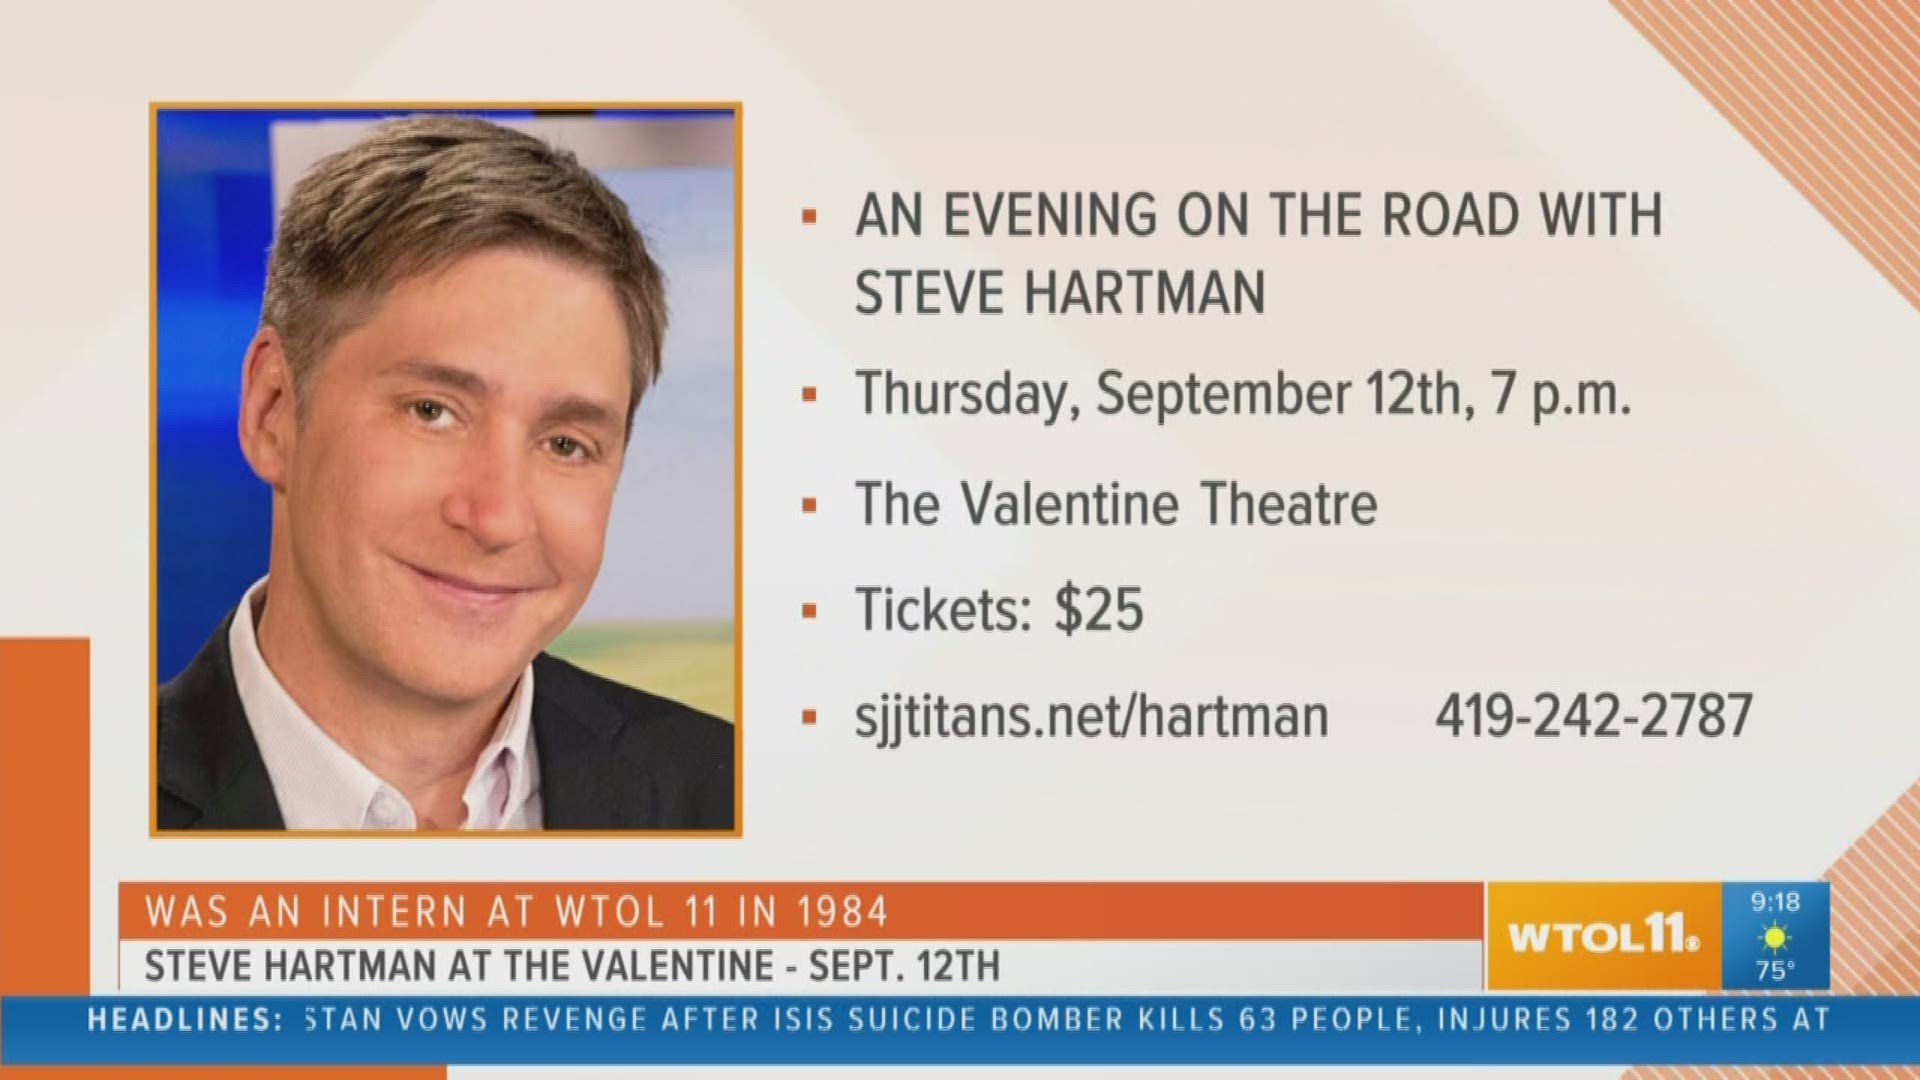 Get your tickets to see Steve Hartman at The Valentine Theater on Sept. 12!